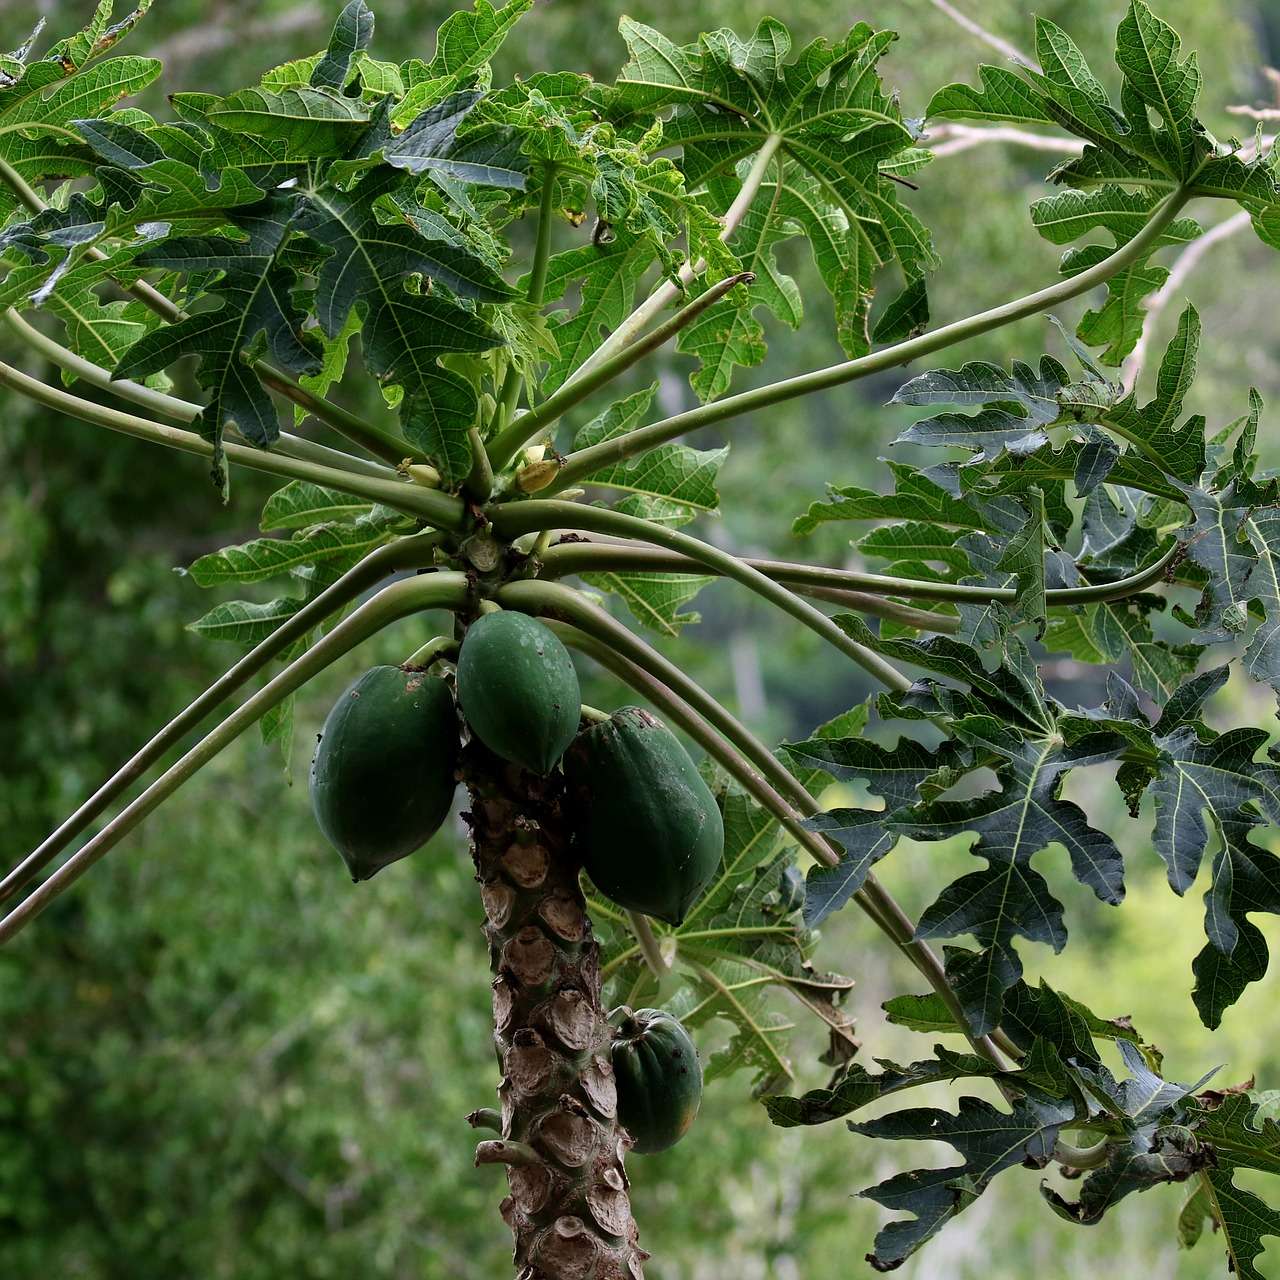 Papaya tree looks just like a palm tree with a softer bark. The papaya fruit is known for its anti-oxidative and anti-inflammatory properties that is ideal for anyone having chronic disease or acute infections. Also, the ladies love it, as it is jam packed with carotenoids which is a good anti-ageing agent for the skin.